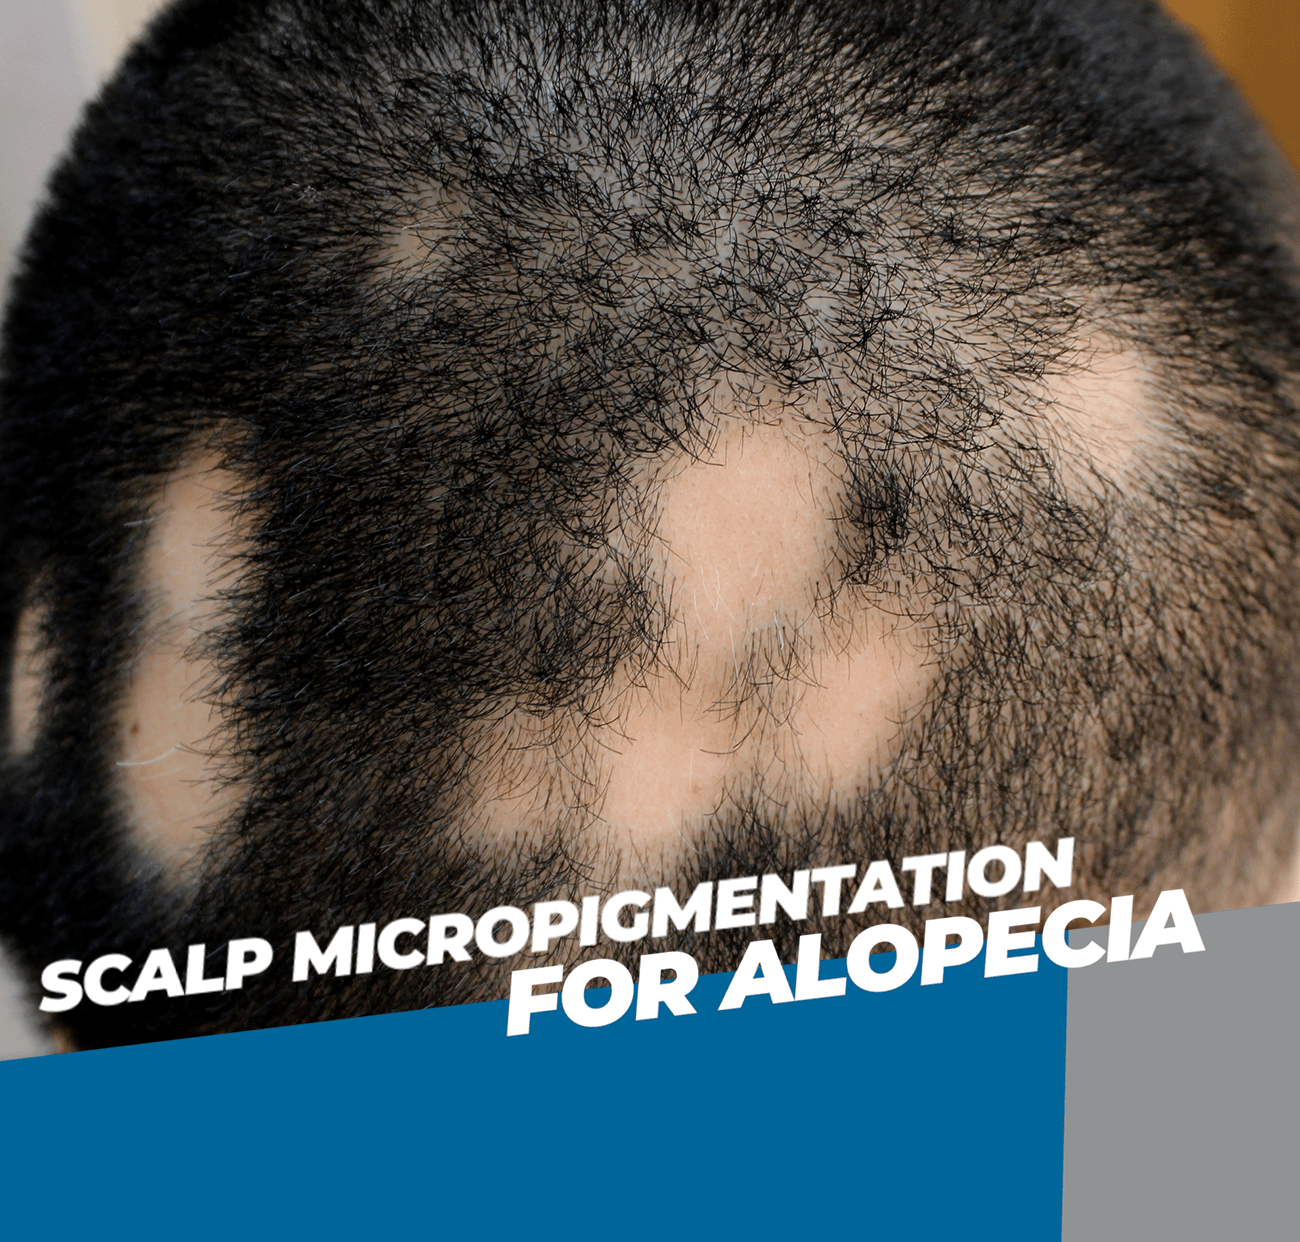 List of signs of alopecia areata